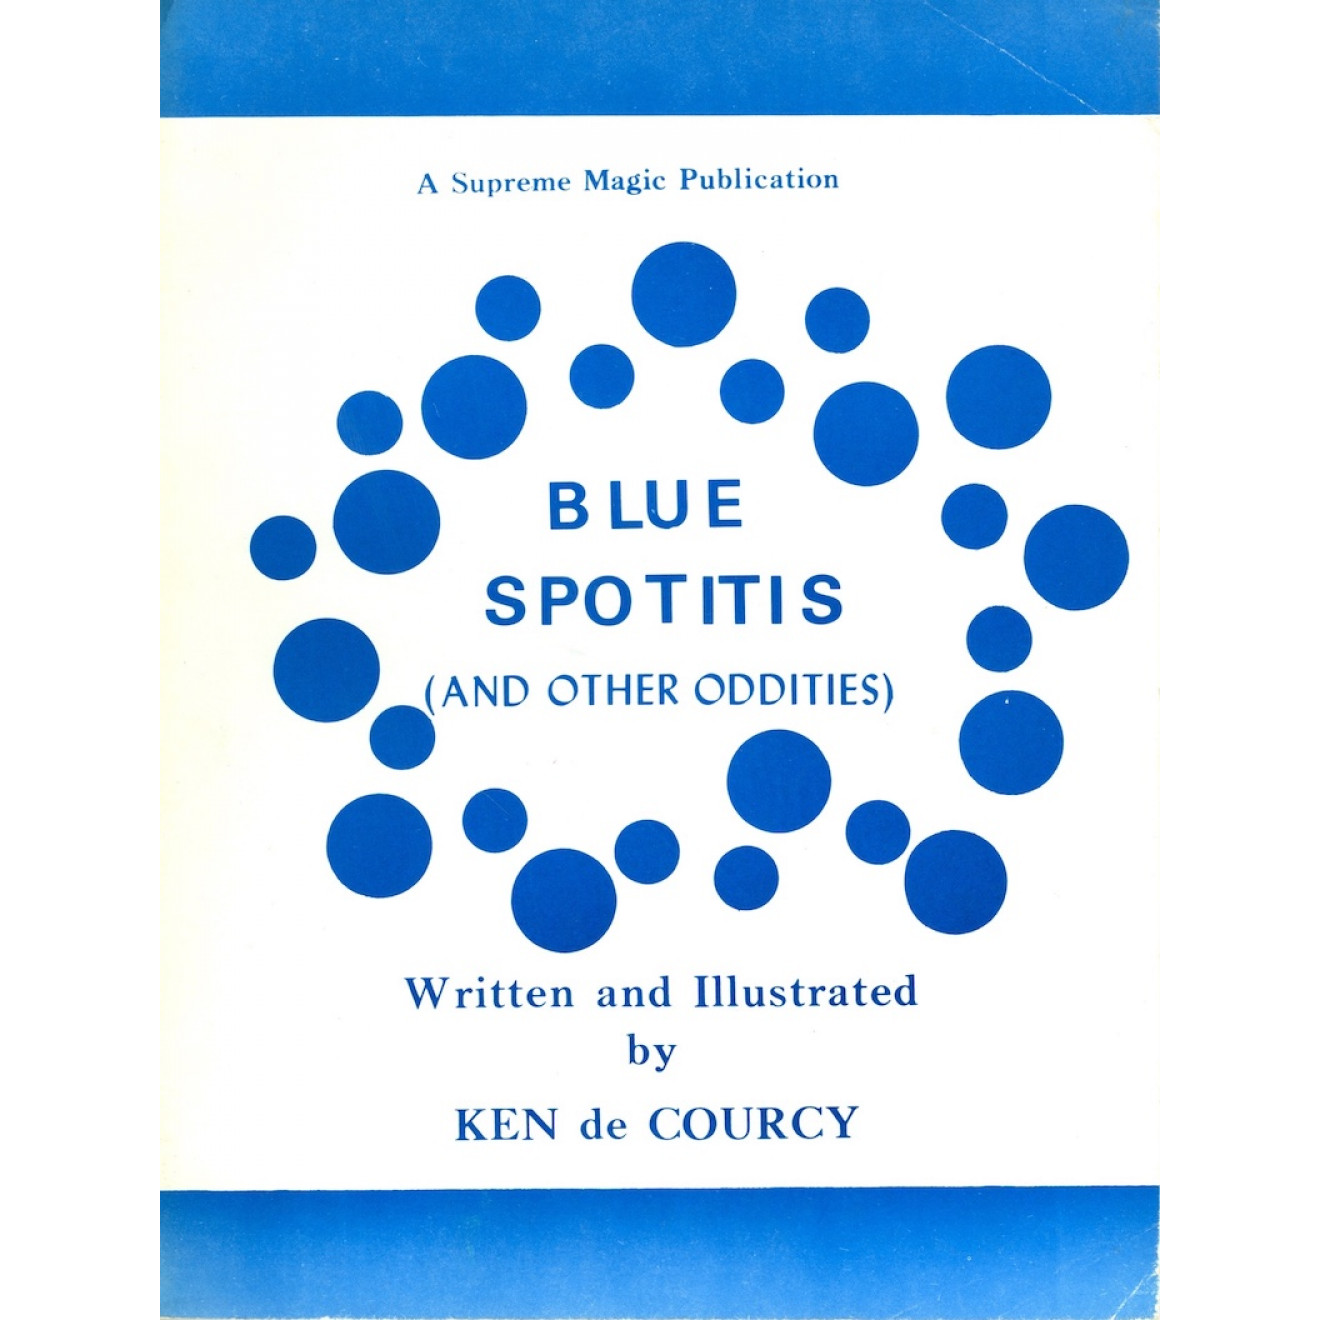 Blue Spotitis (And Other Oddities)